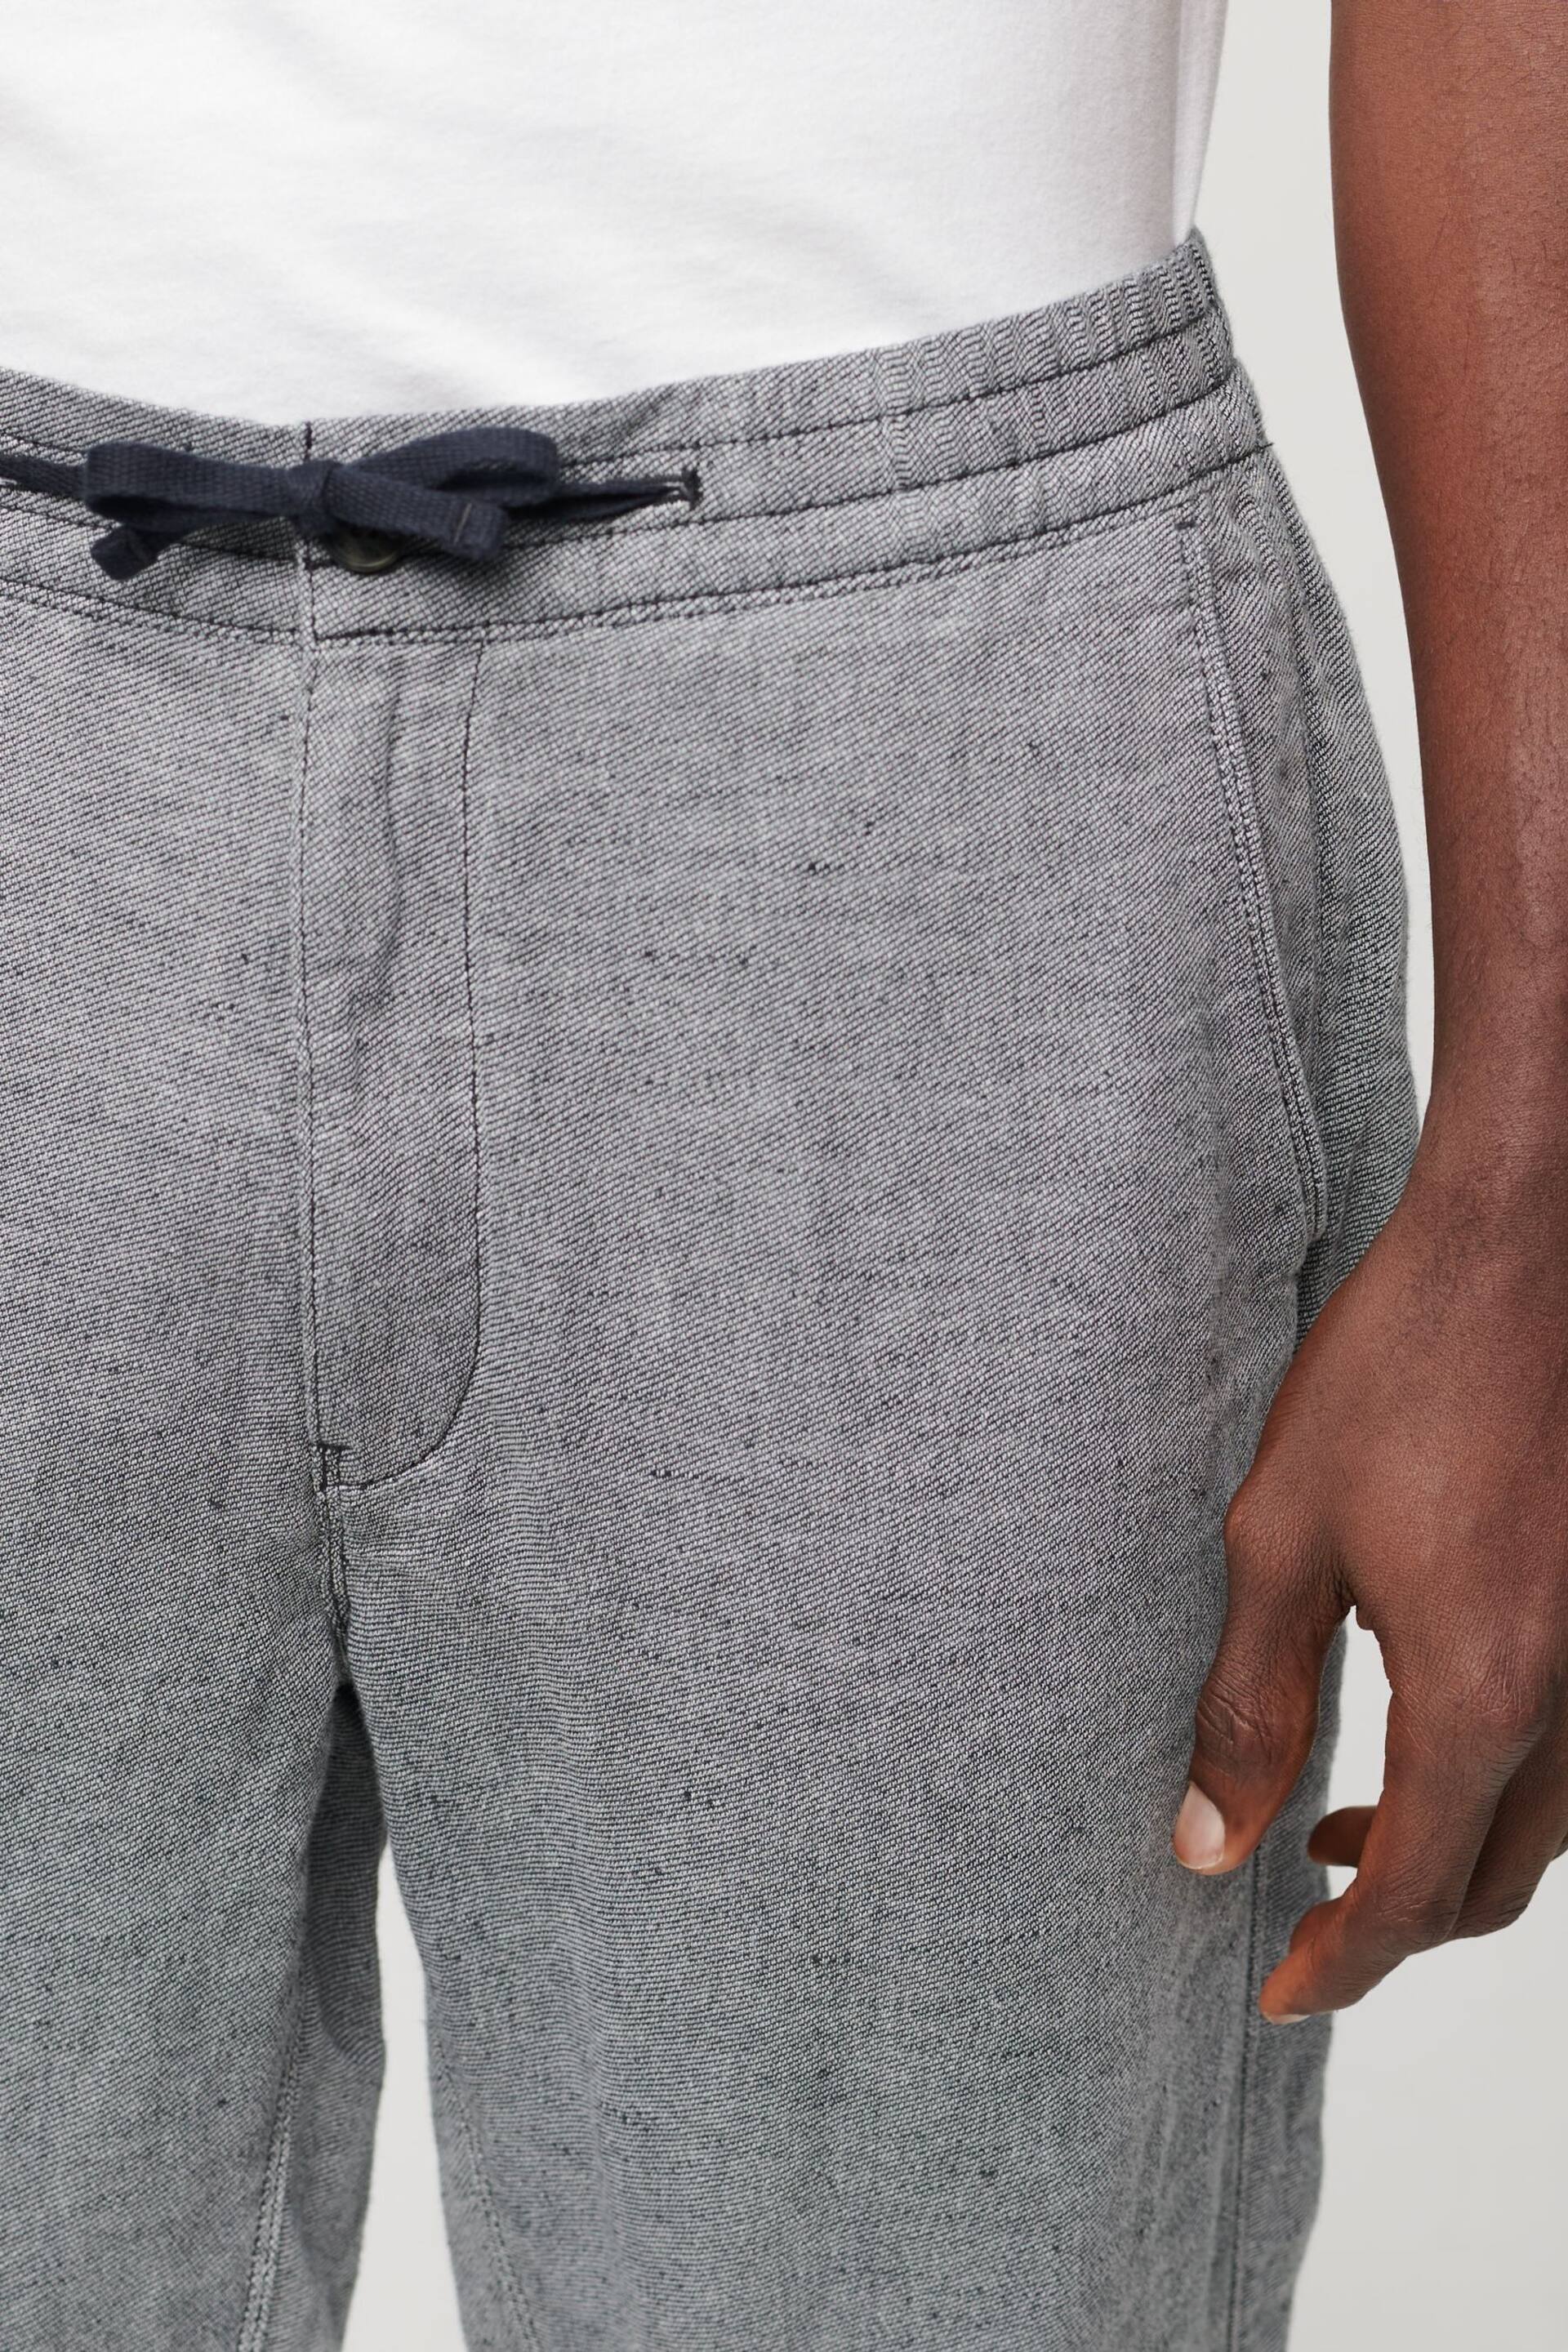 Superdry Grey Drawstring Linen Trousers - Image 4 of 5